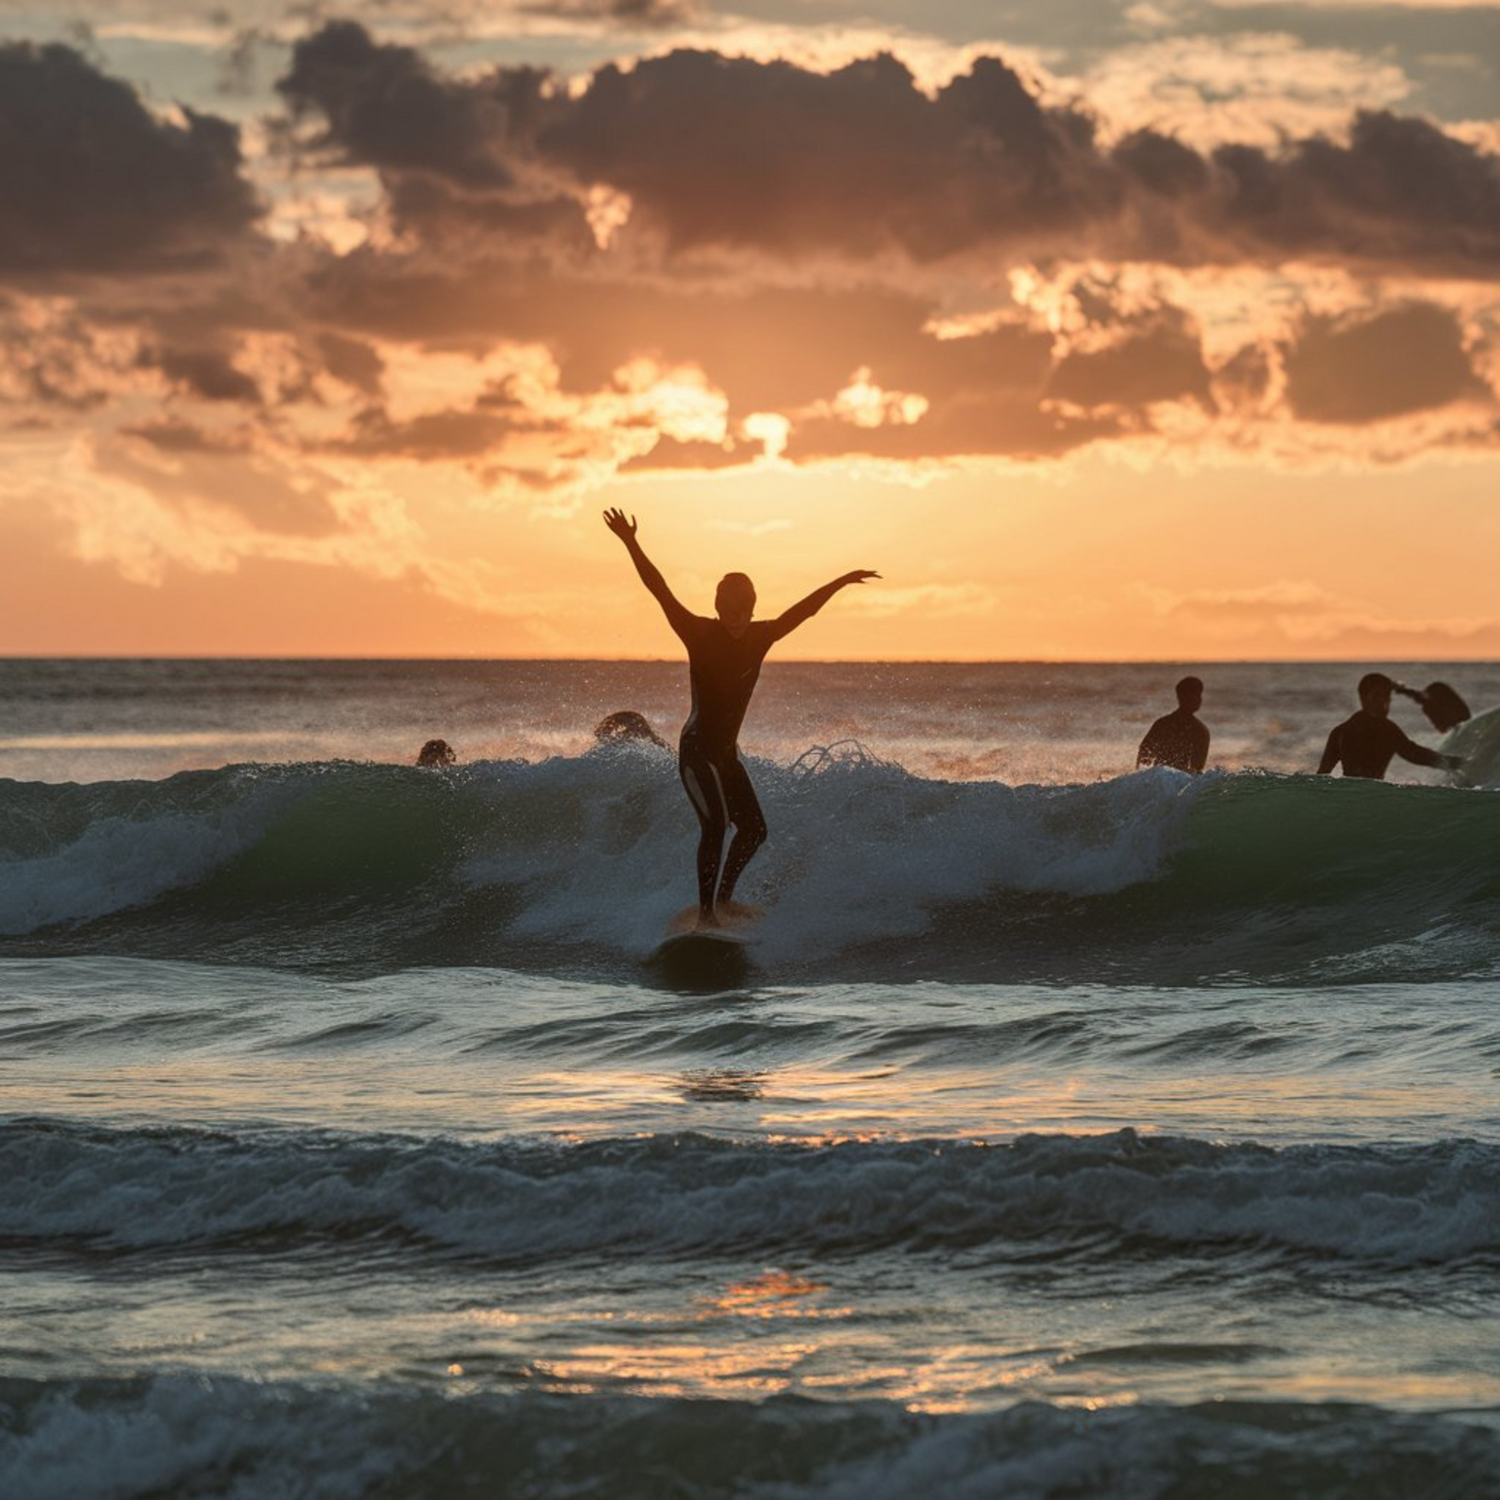 Spring arrives in the form of surfing! Discover the best surfing options for this season!